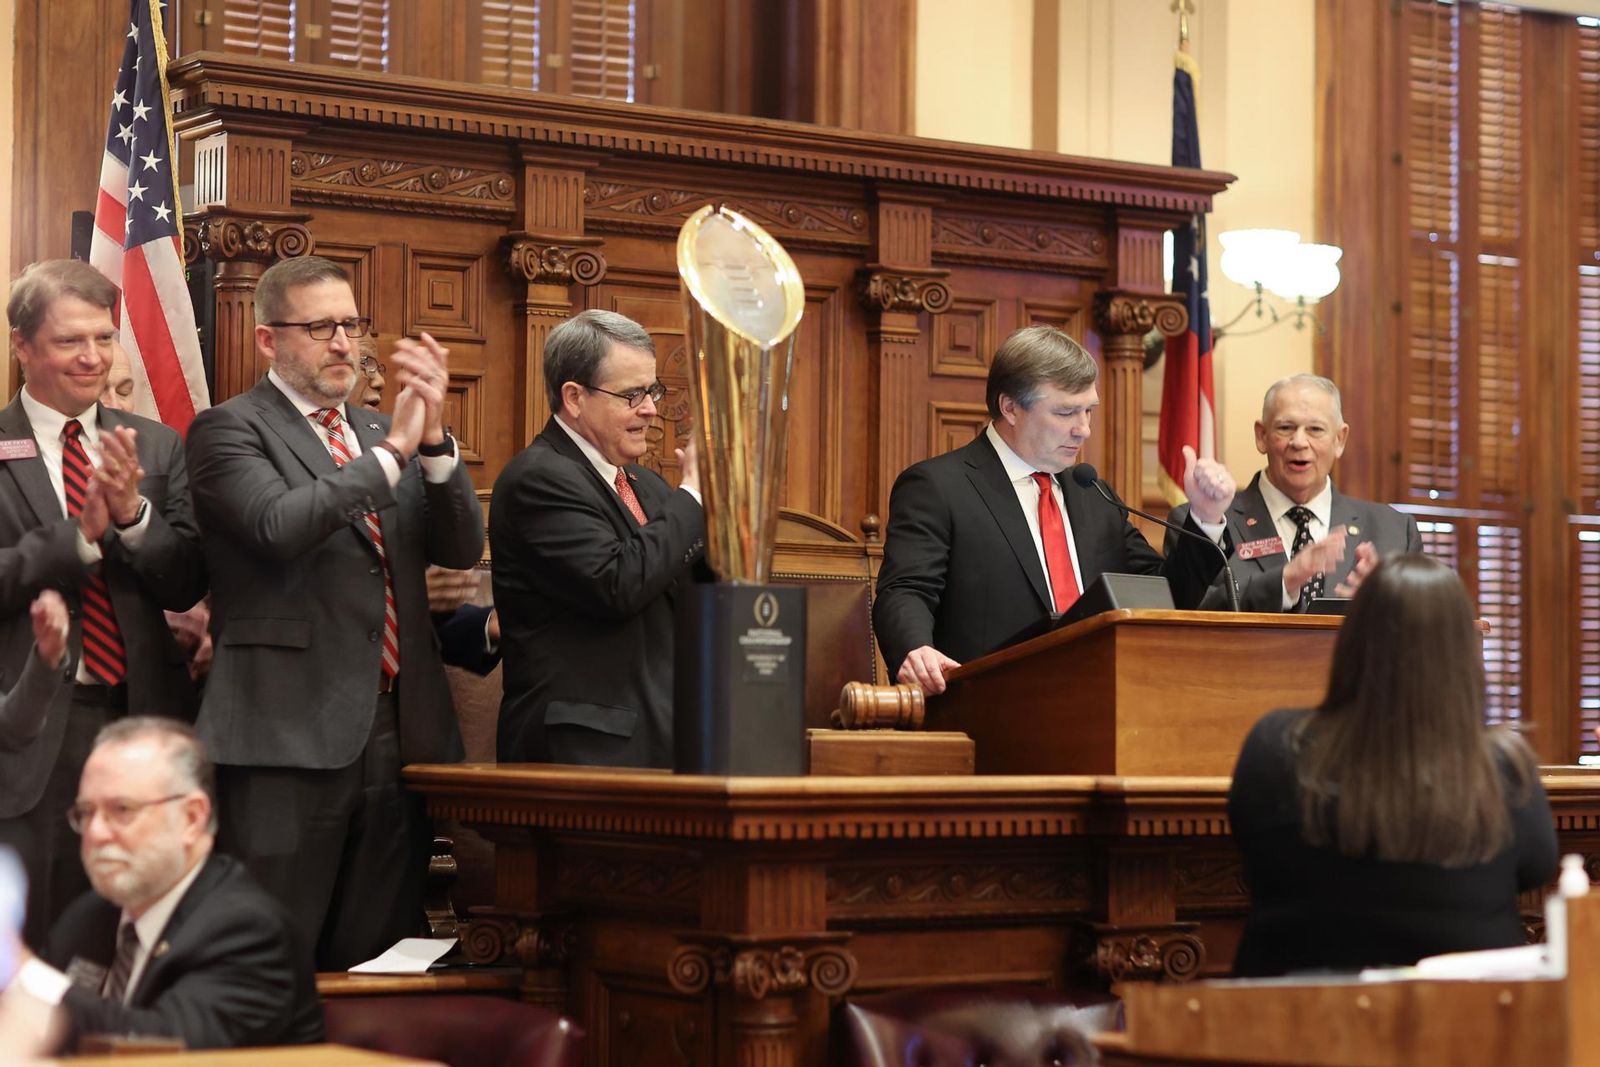 Coach Kirby Smart was commended on the House floor for winning the coveted College Football Playoff earlier this year.